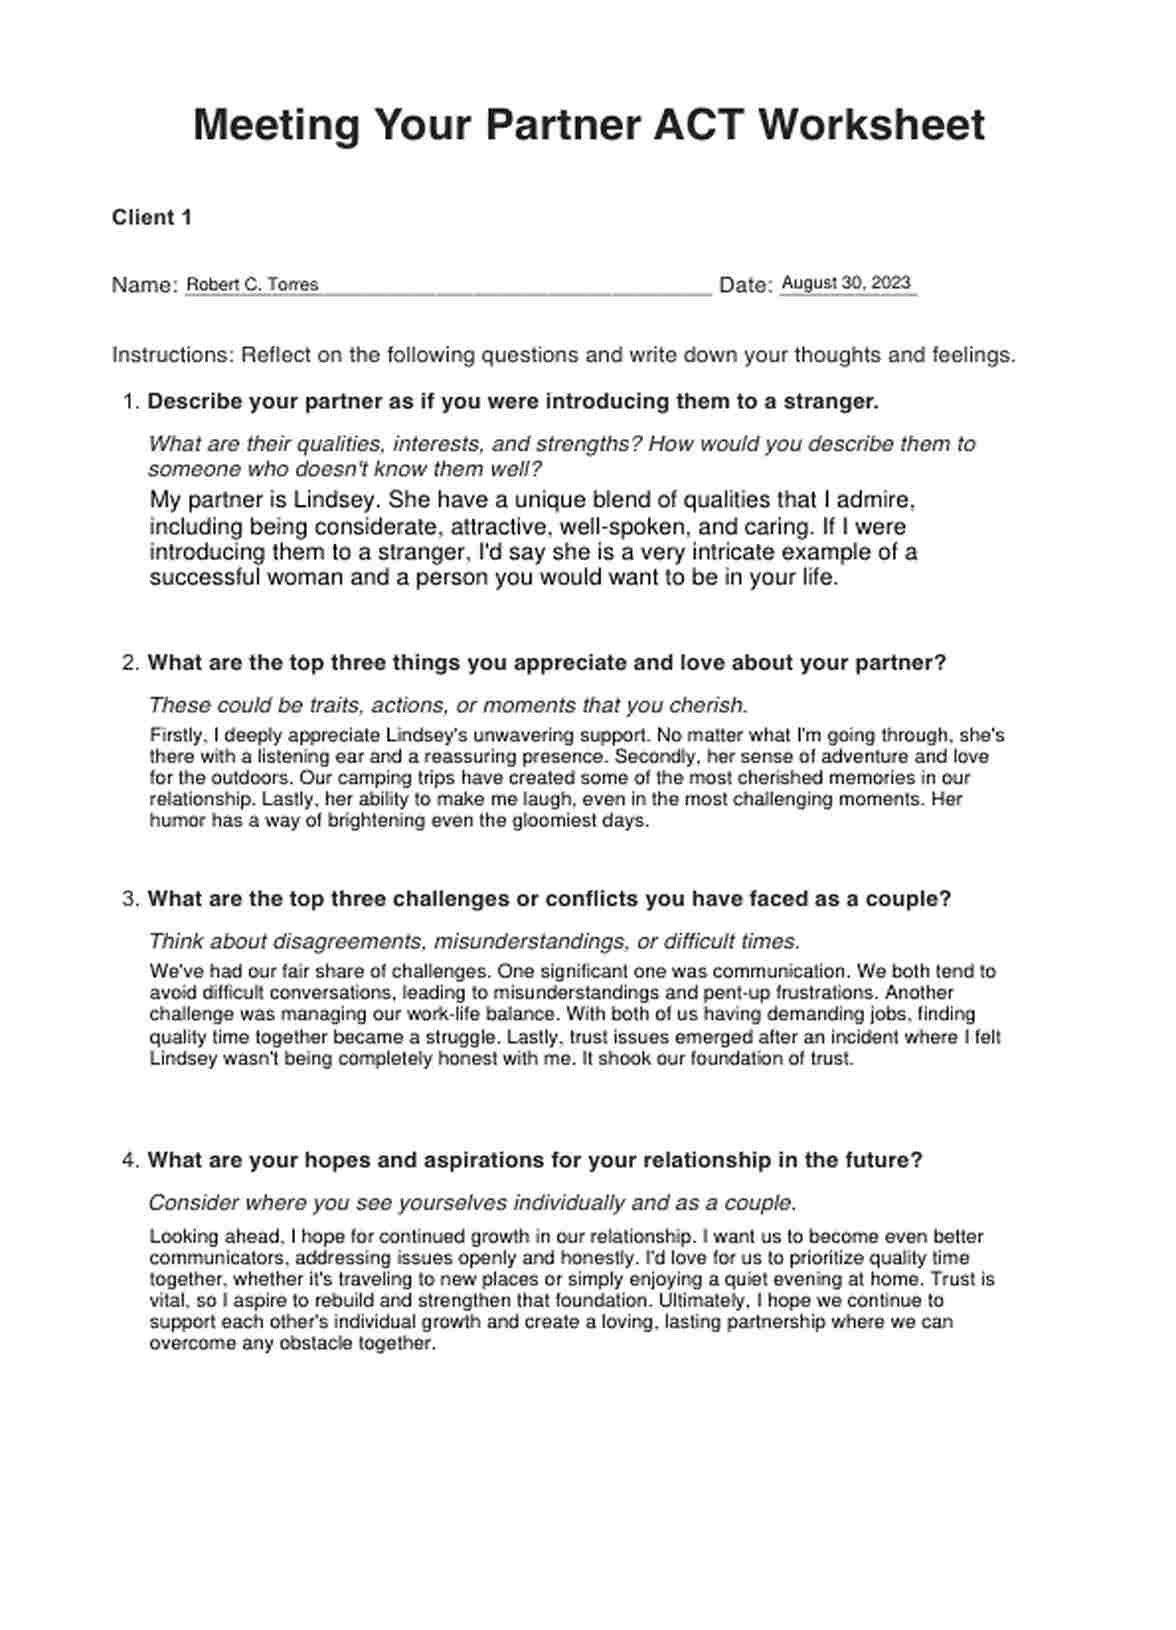 Meeting Your Partner ACT Worksheet PDF Example